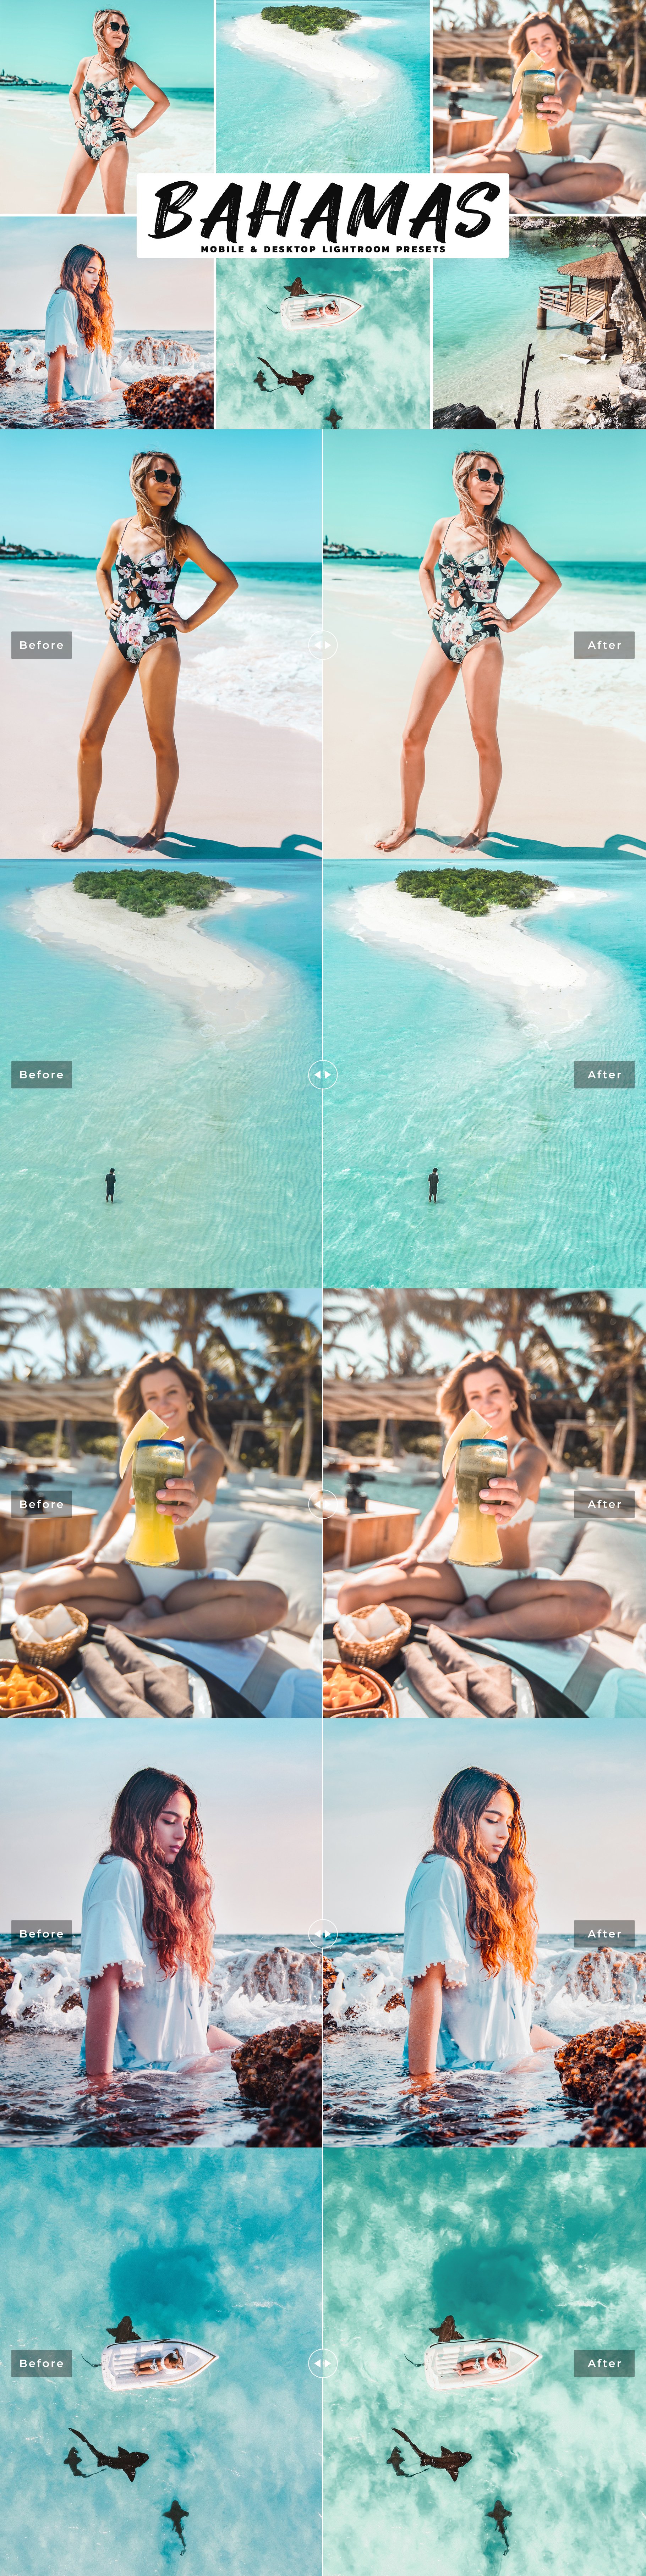 Bahamas Lightroom Presets Packcover image.